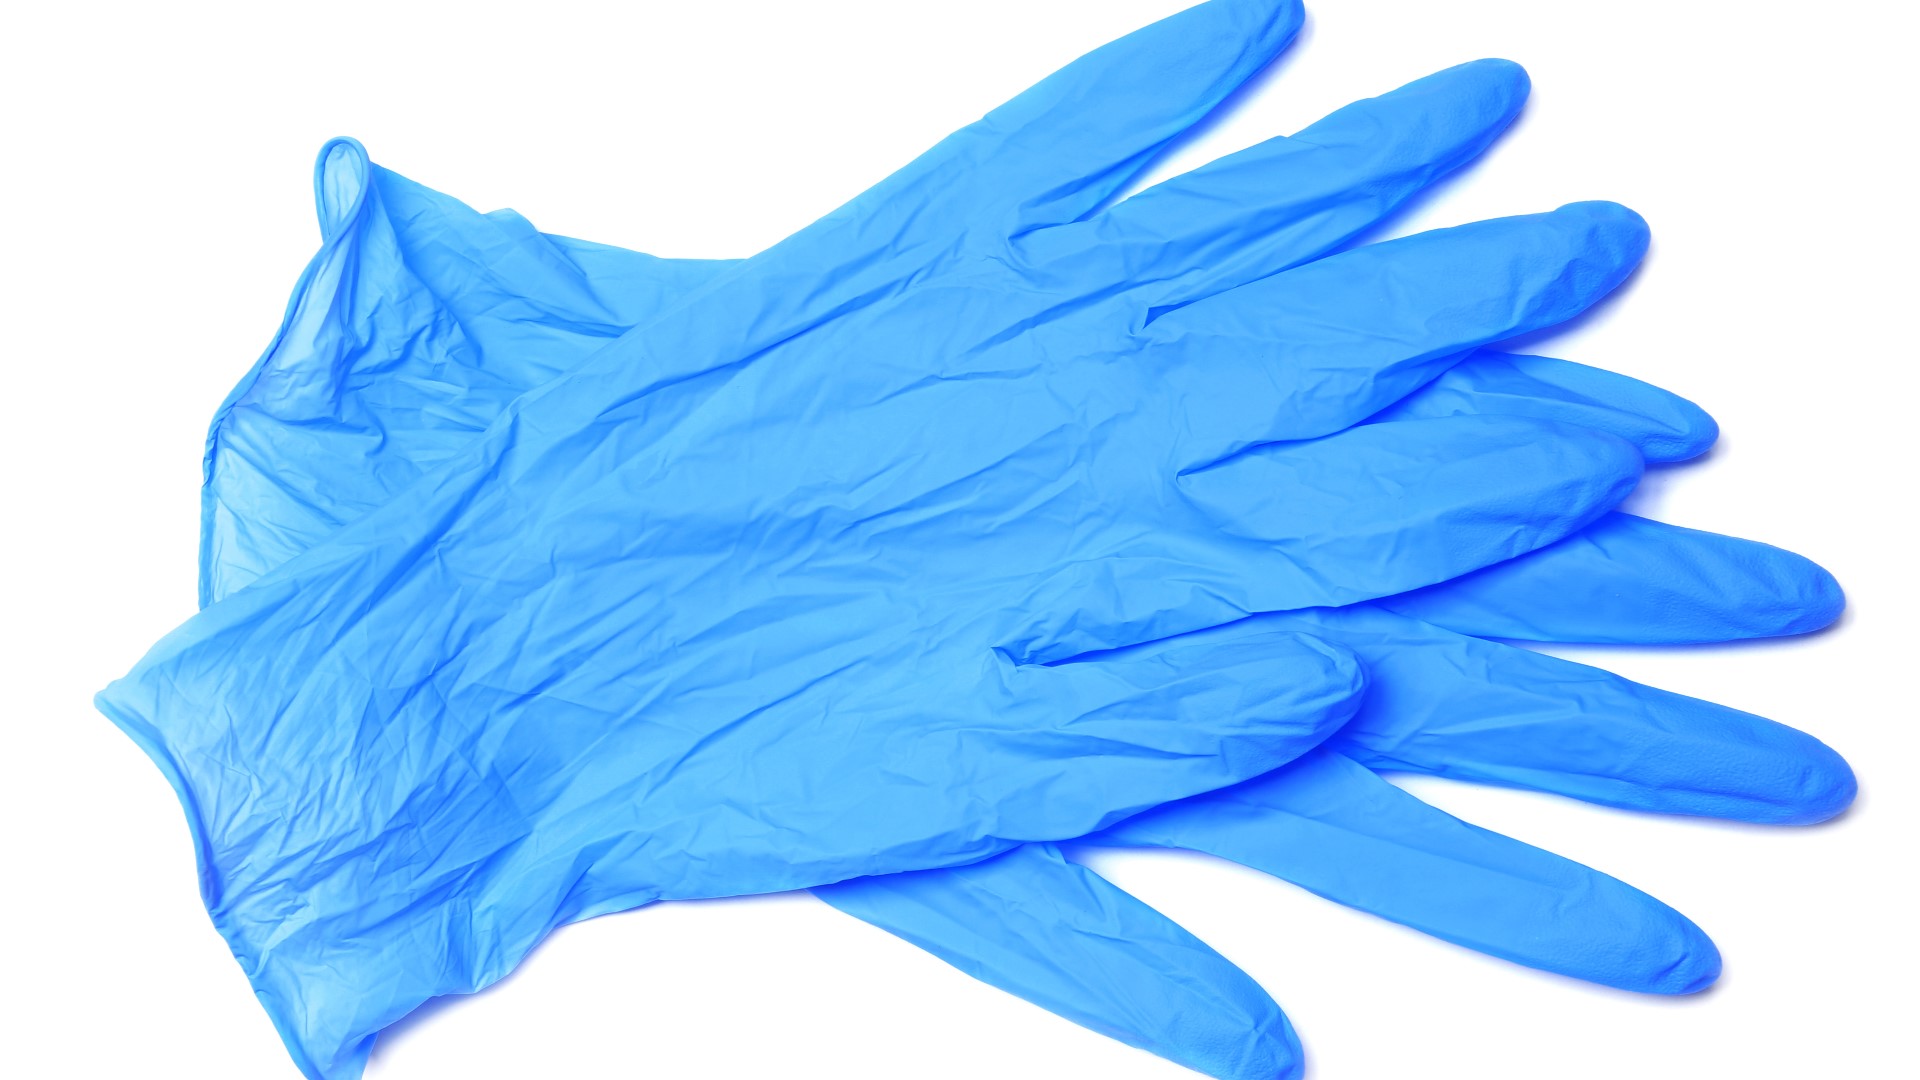 The company plans to produce personal protective equipment (PPE), including disposable gloves.